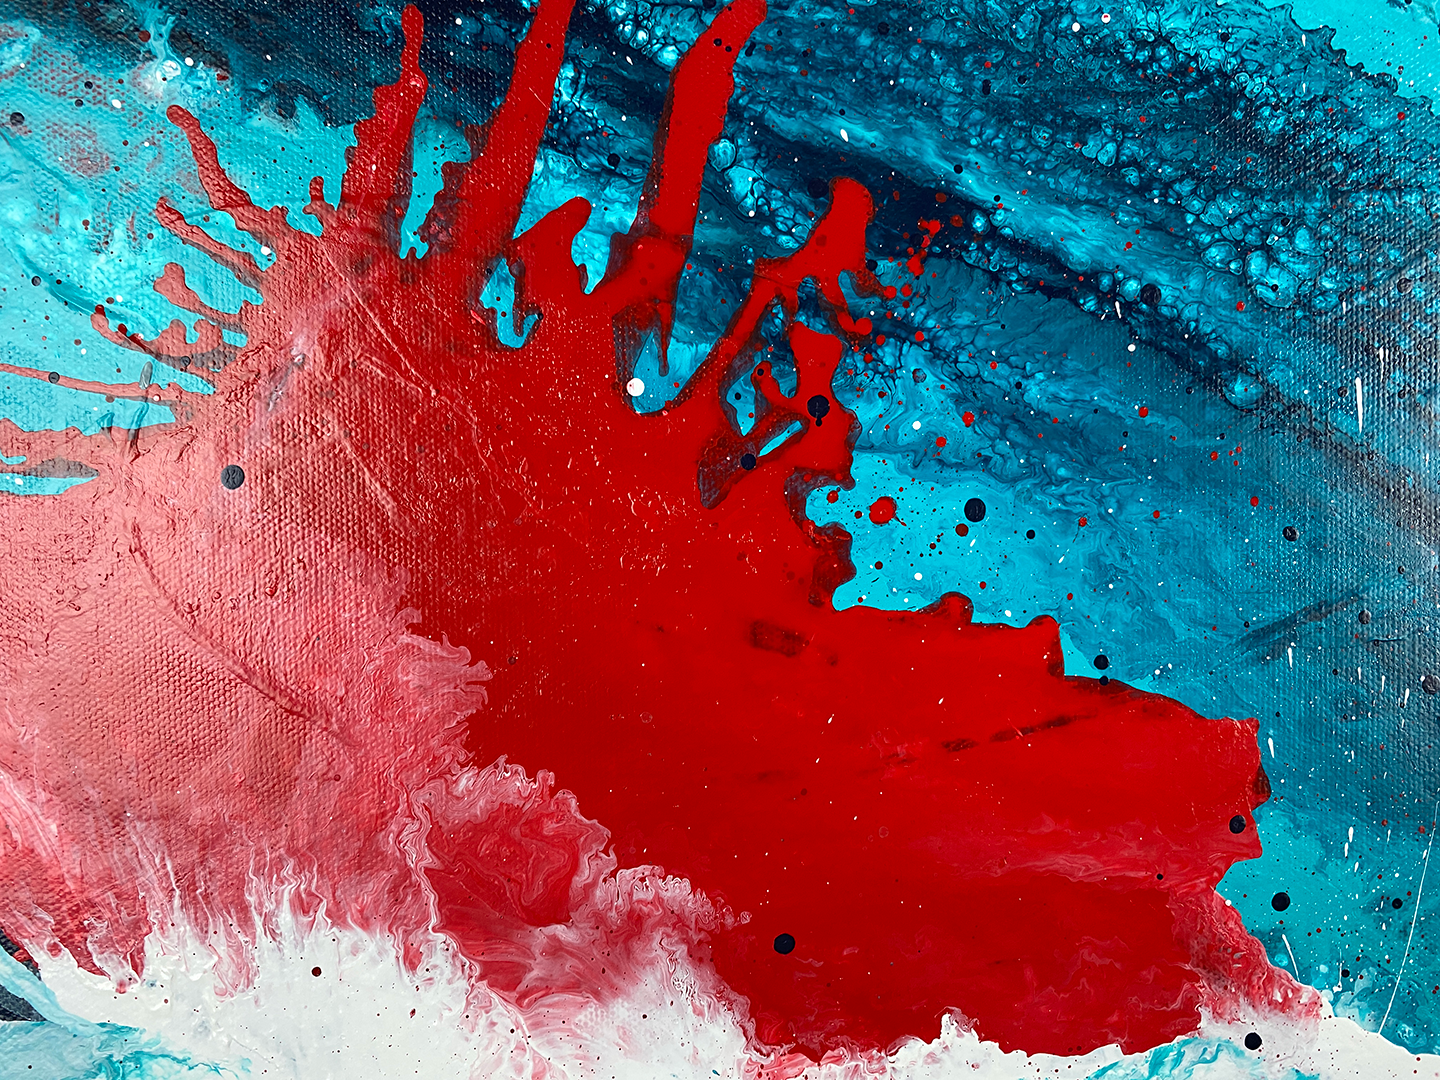 Abstract, expressionism, acrylic painting close-up 3. Volatile interactions of black, dark blue, turquoise, bright red and white